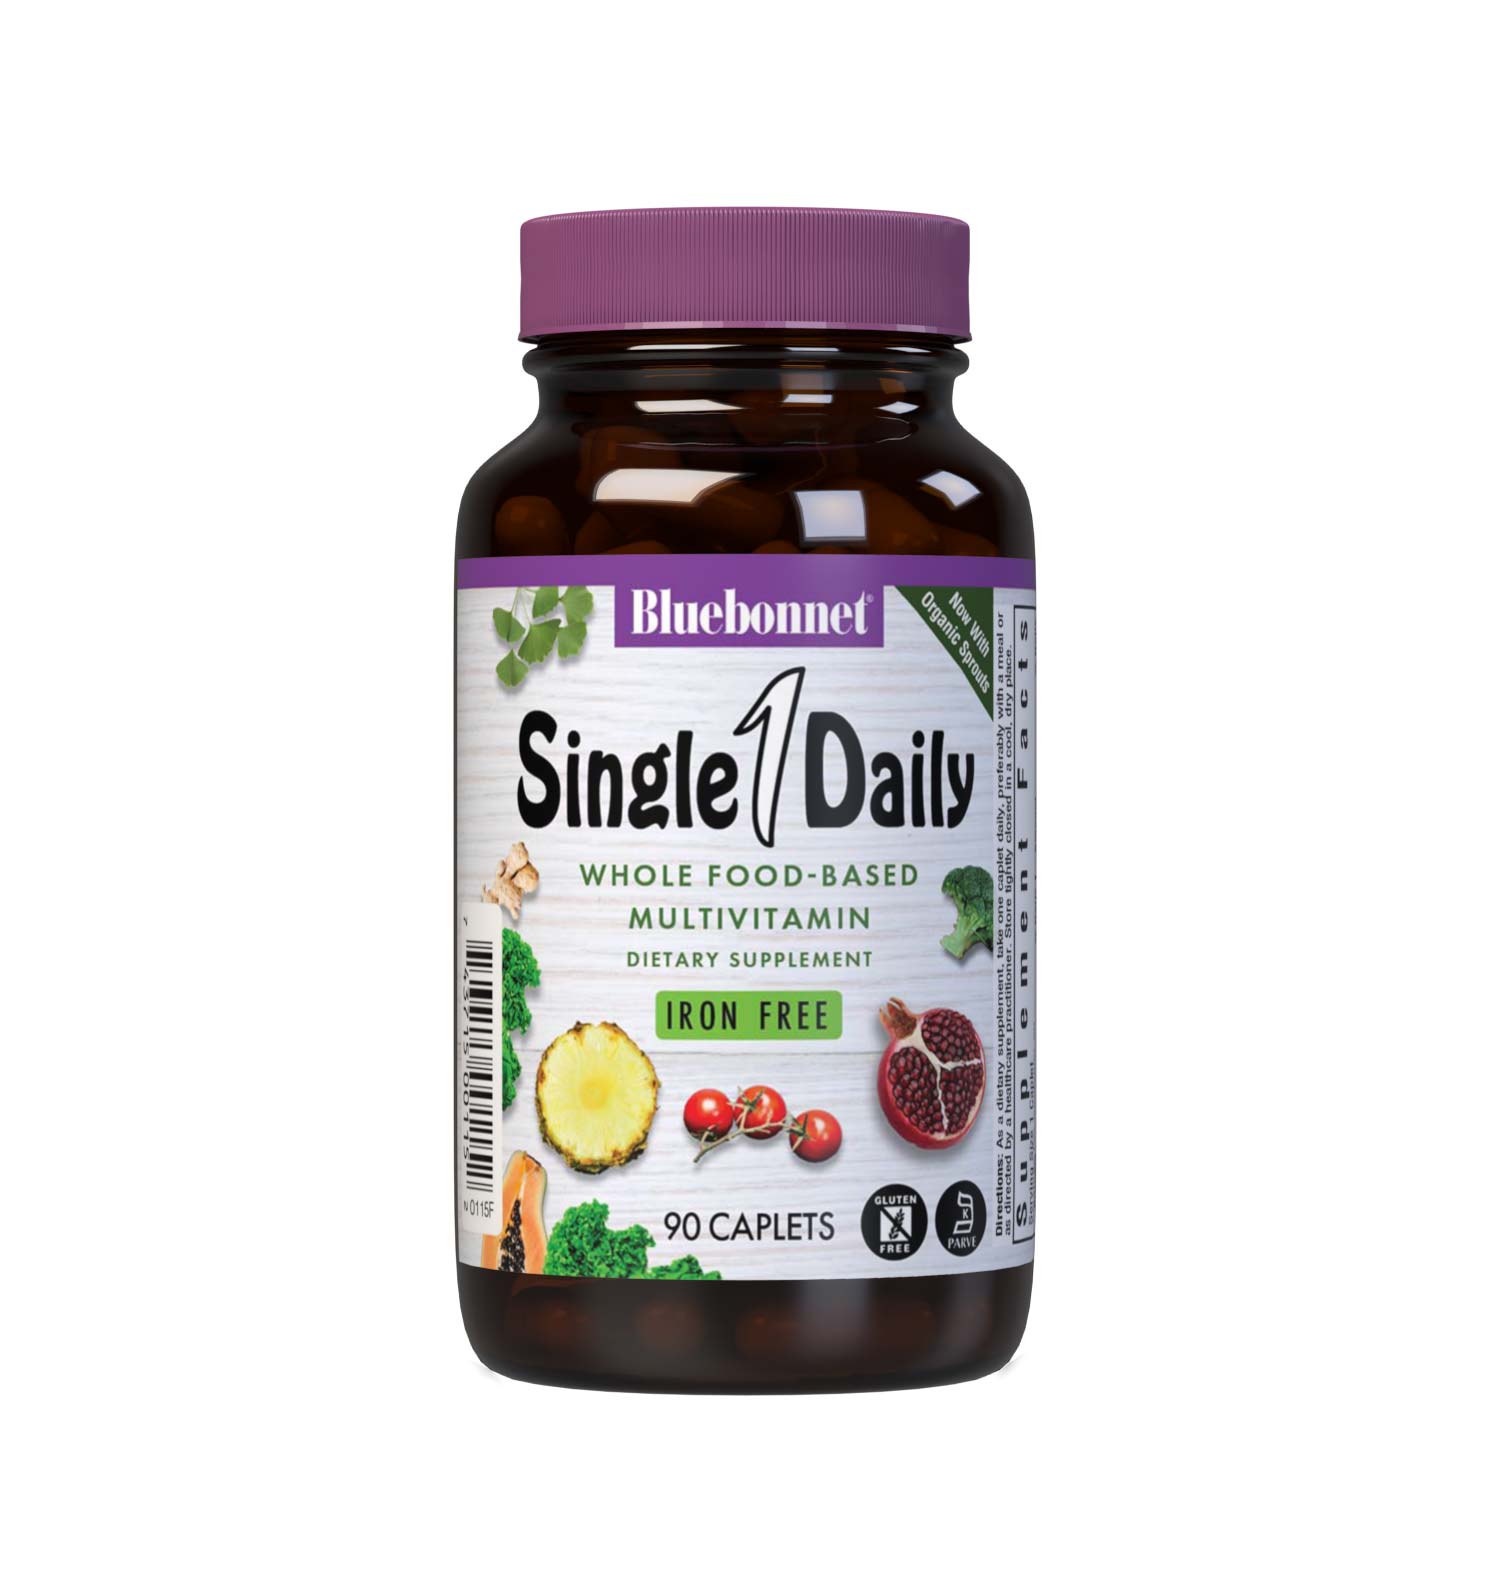 SingleDaily Multiple (Iron-Free) 90 caplets whole food-based formula offers essential vitamins, minerals and enzymes from unique, kosher-certified, plant-based ingredients, such as adaptogenic and immune-boosting herbs, greens from nutrient-dense spirulina, chlorella and chlorophyll, lycopene from tomatoes and potent anti-aging antioxidants from pomegranate fruit. #size_90 count